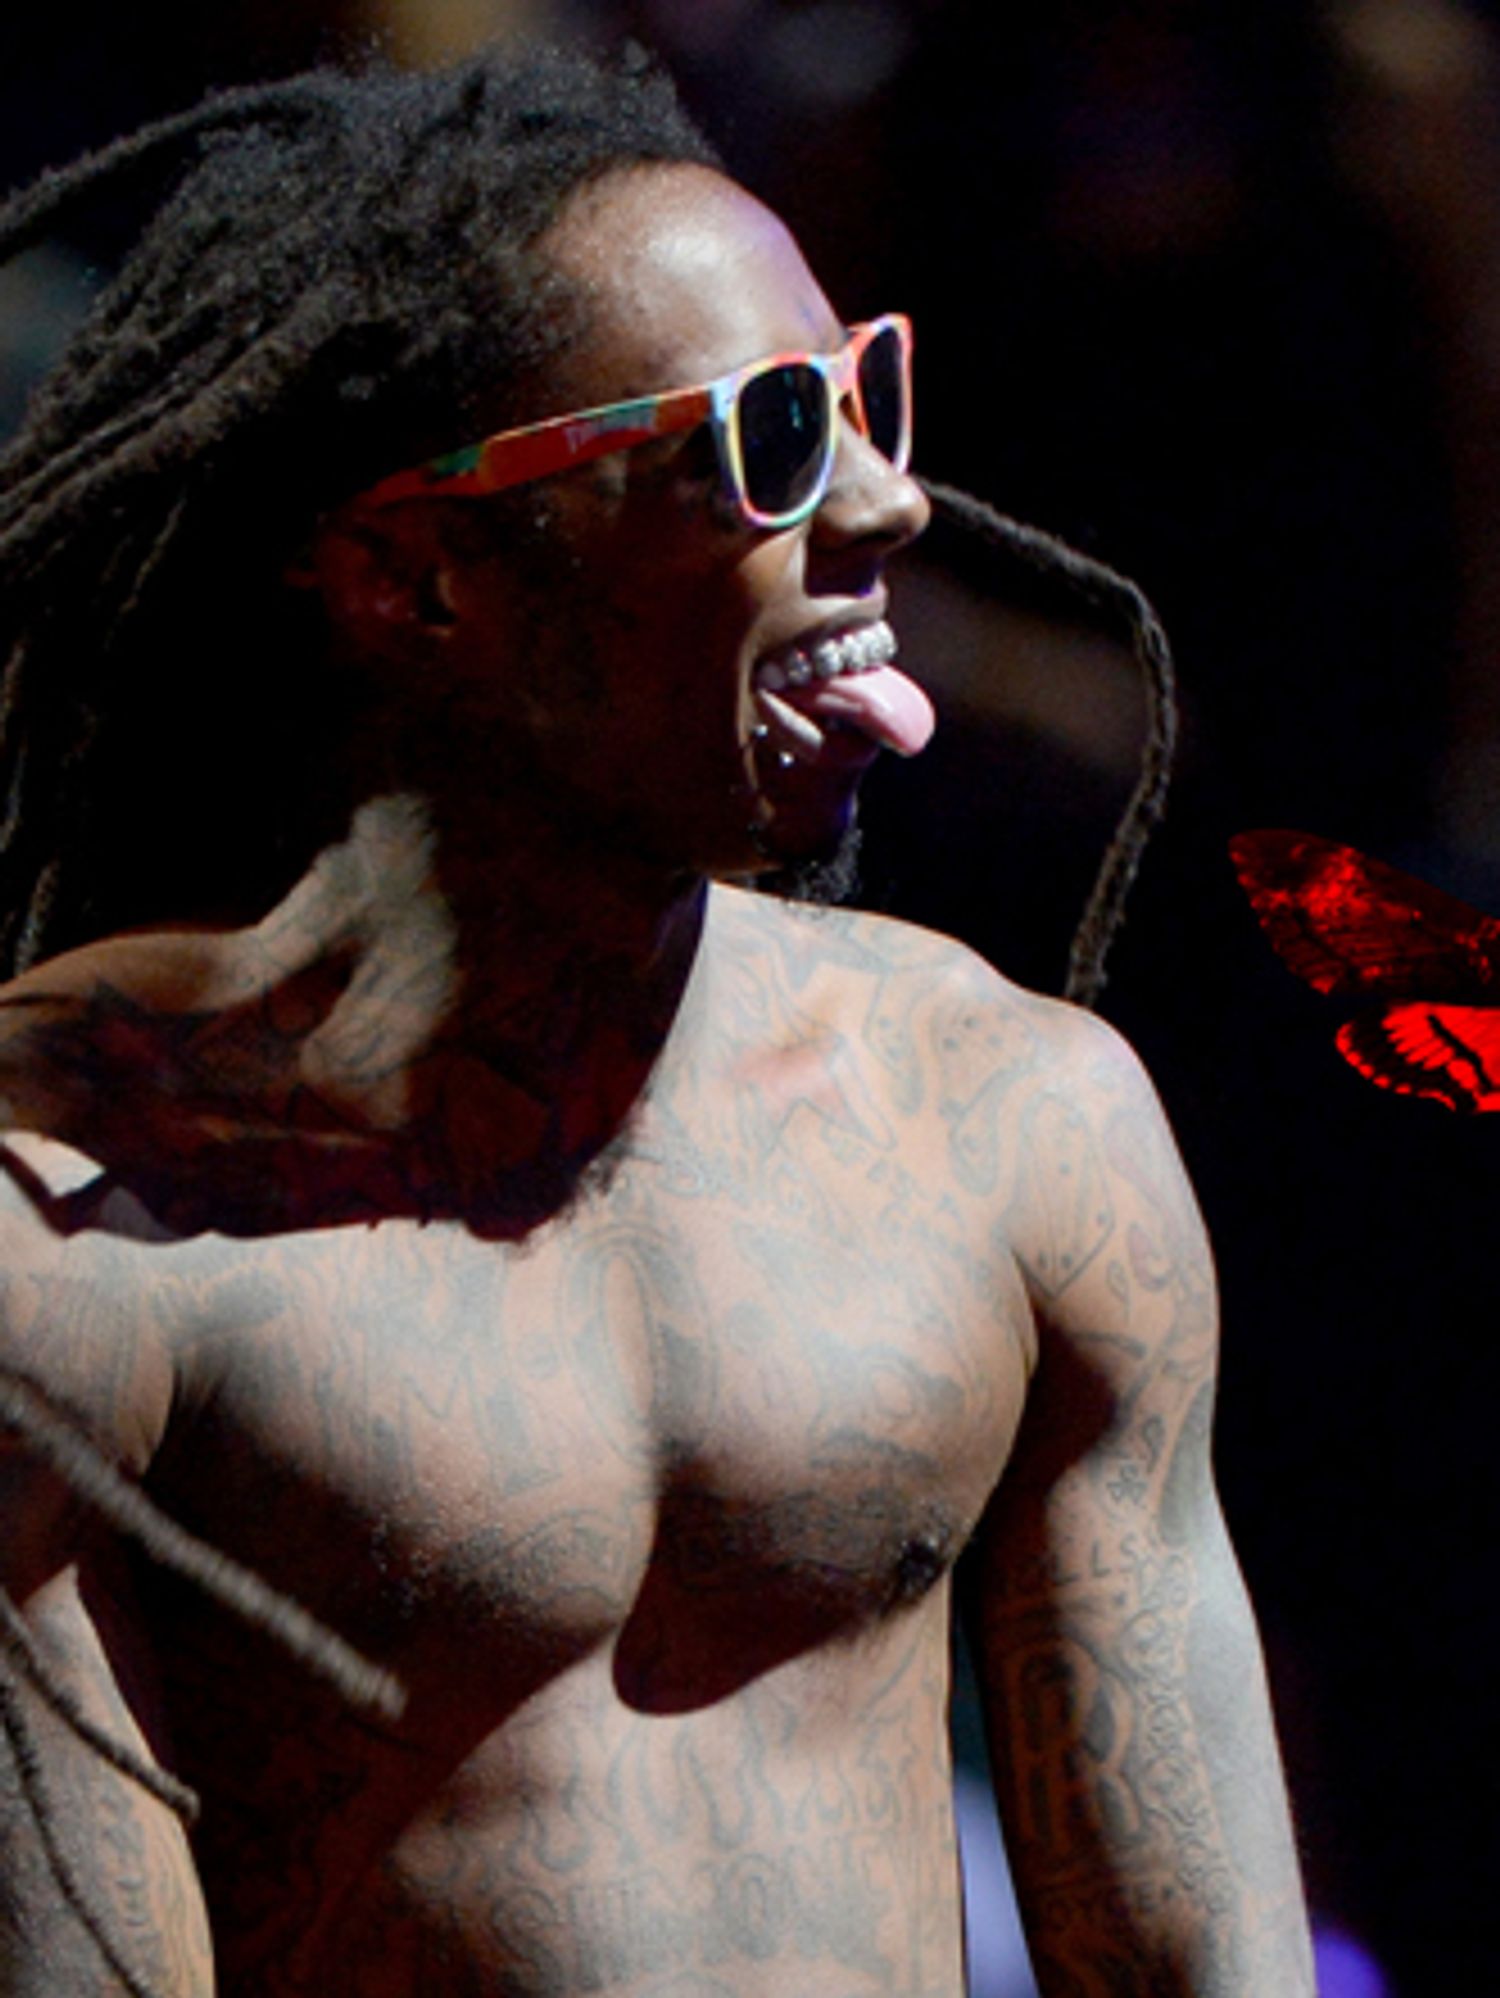 Lil Wayne's "I Am Not a Human Being II" Reviewed: "God Bless